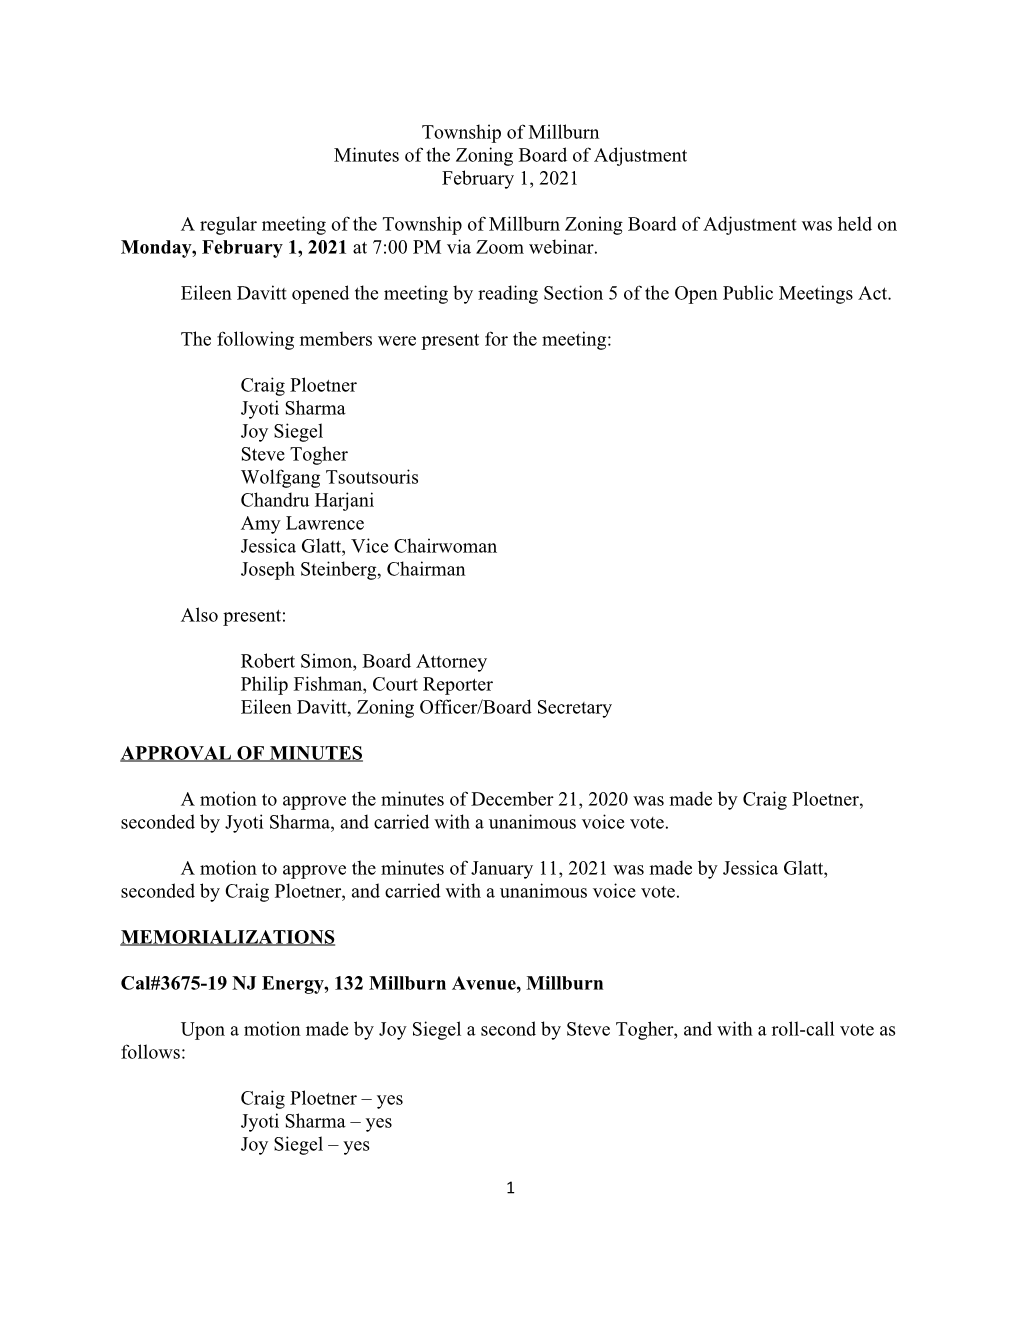 Township of Millburn Minutes of the Zoning Board of Adjustment February 1, 2021